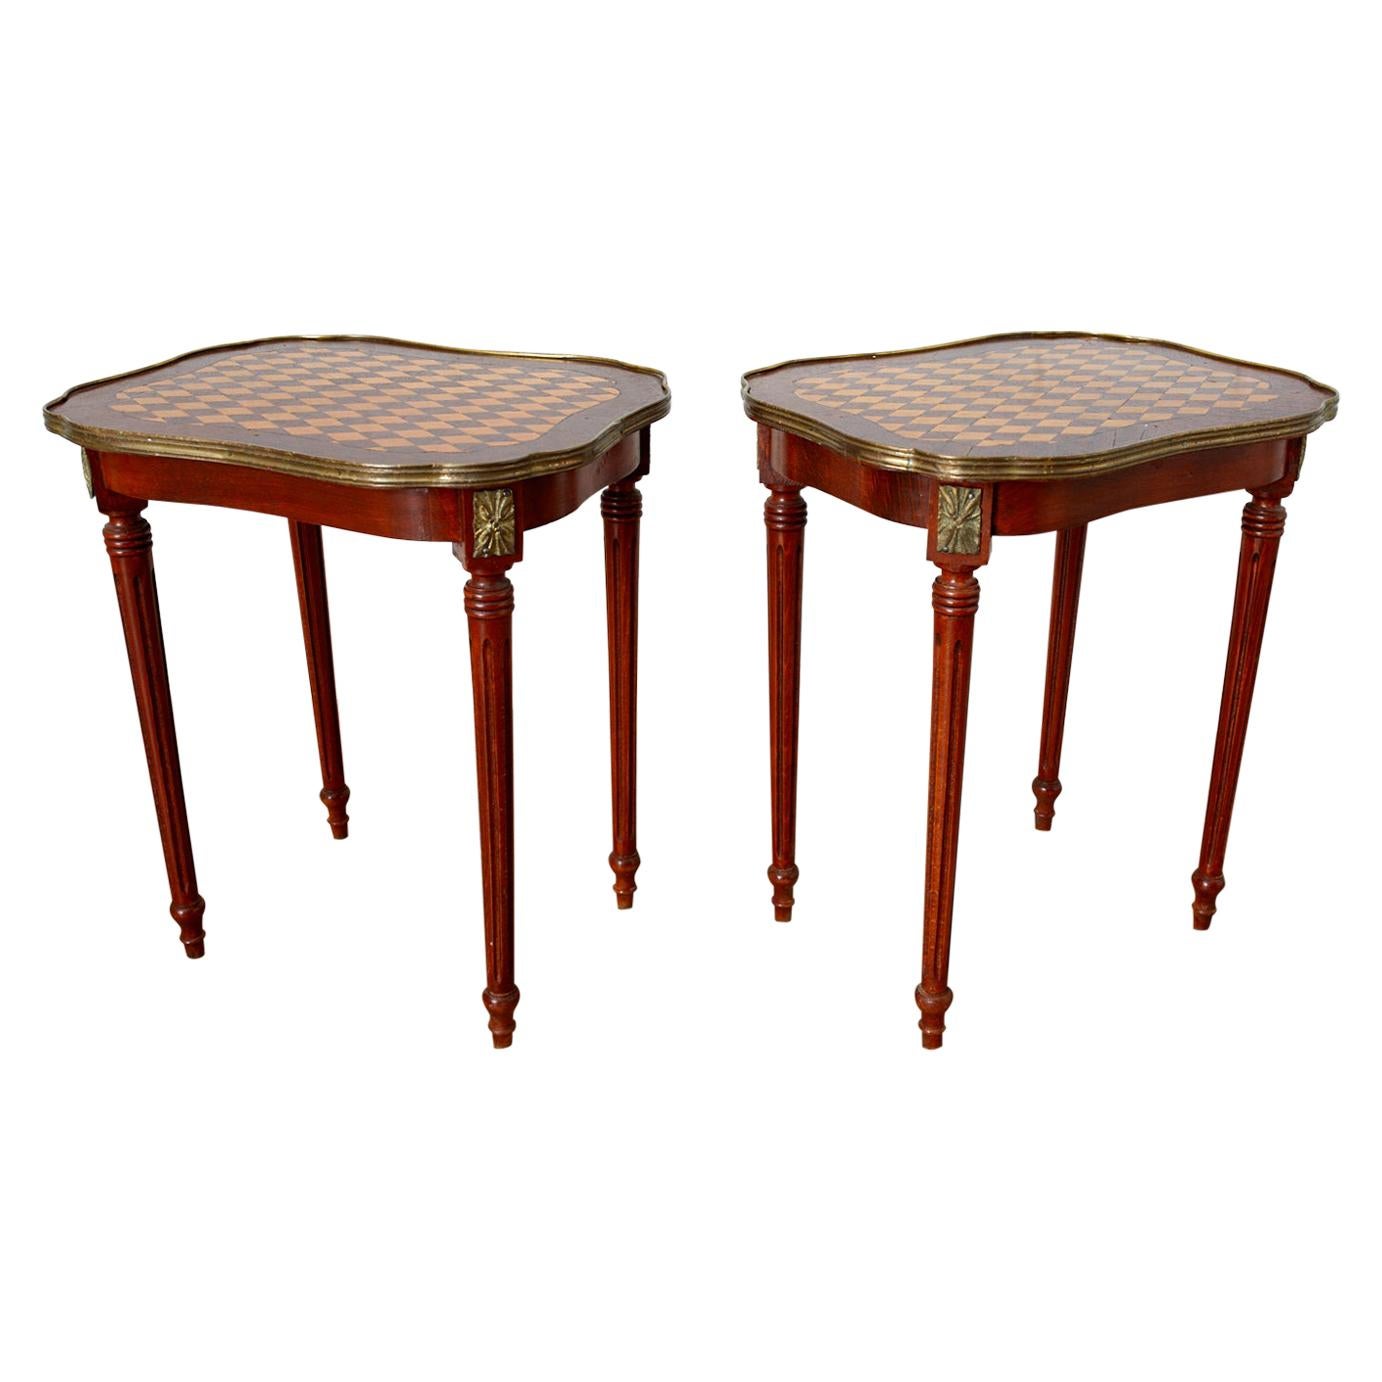 Pair of Louis XVI Style Inlay Drinks Tables